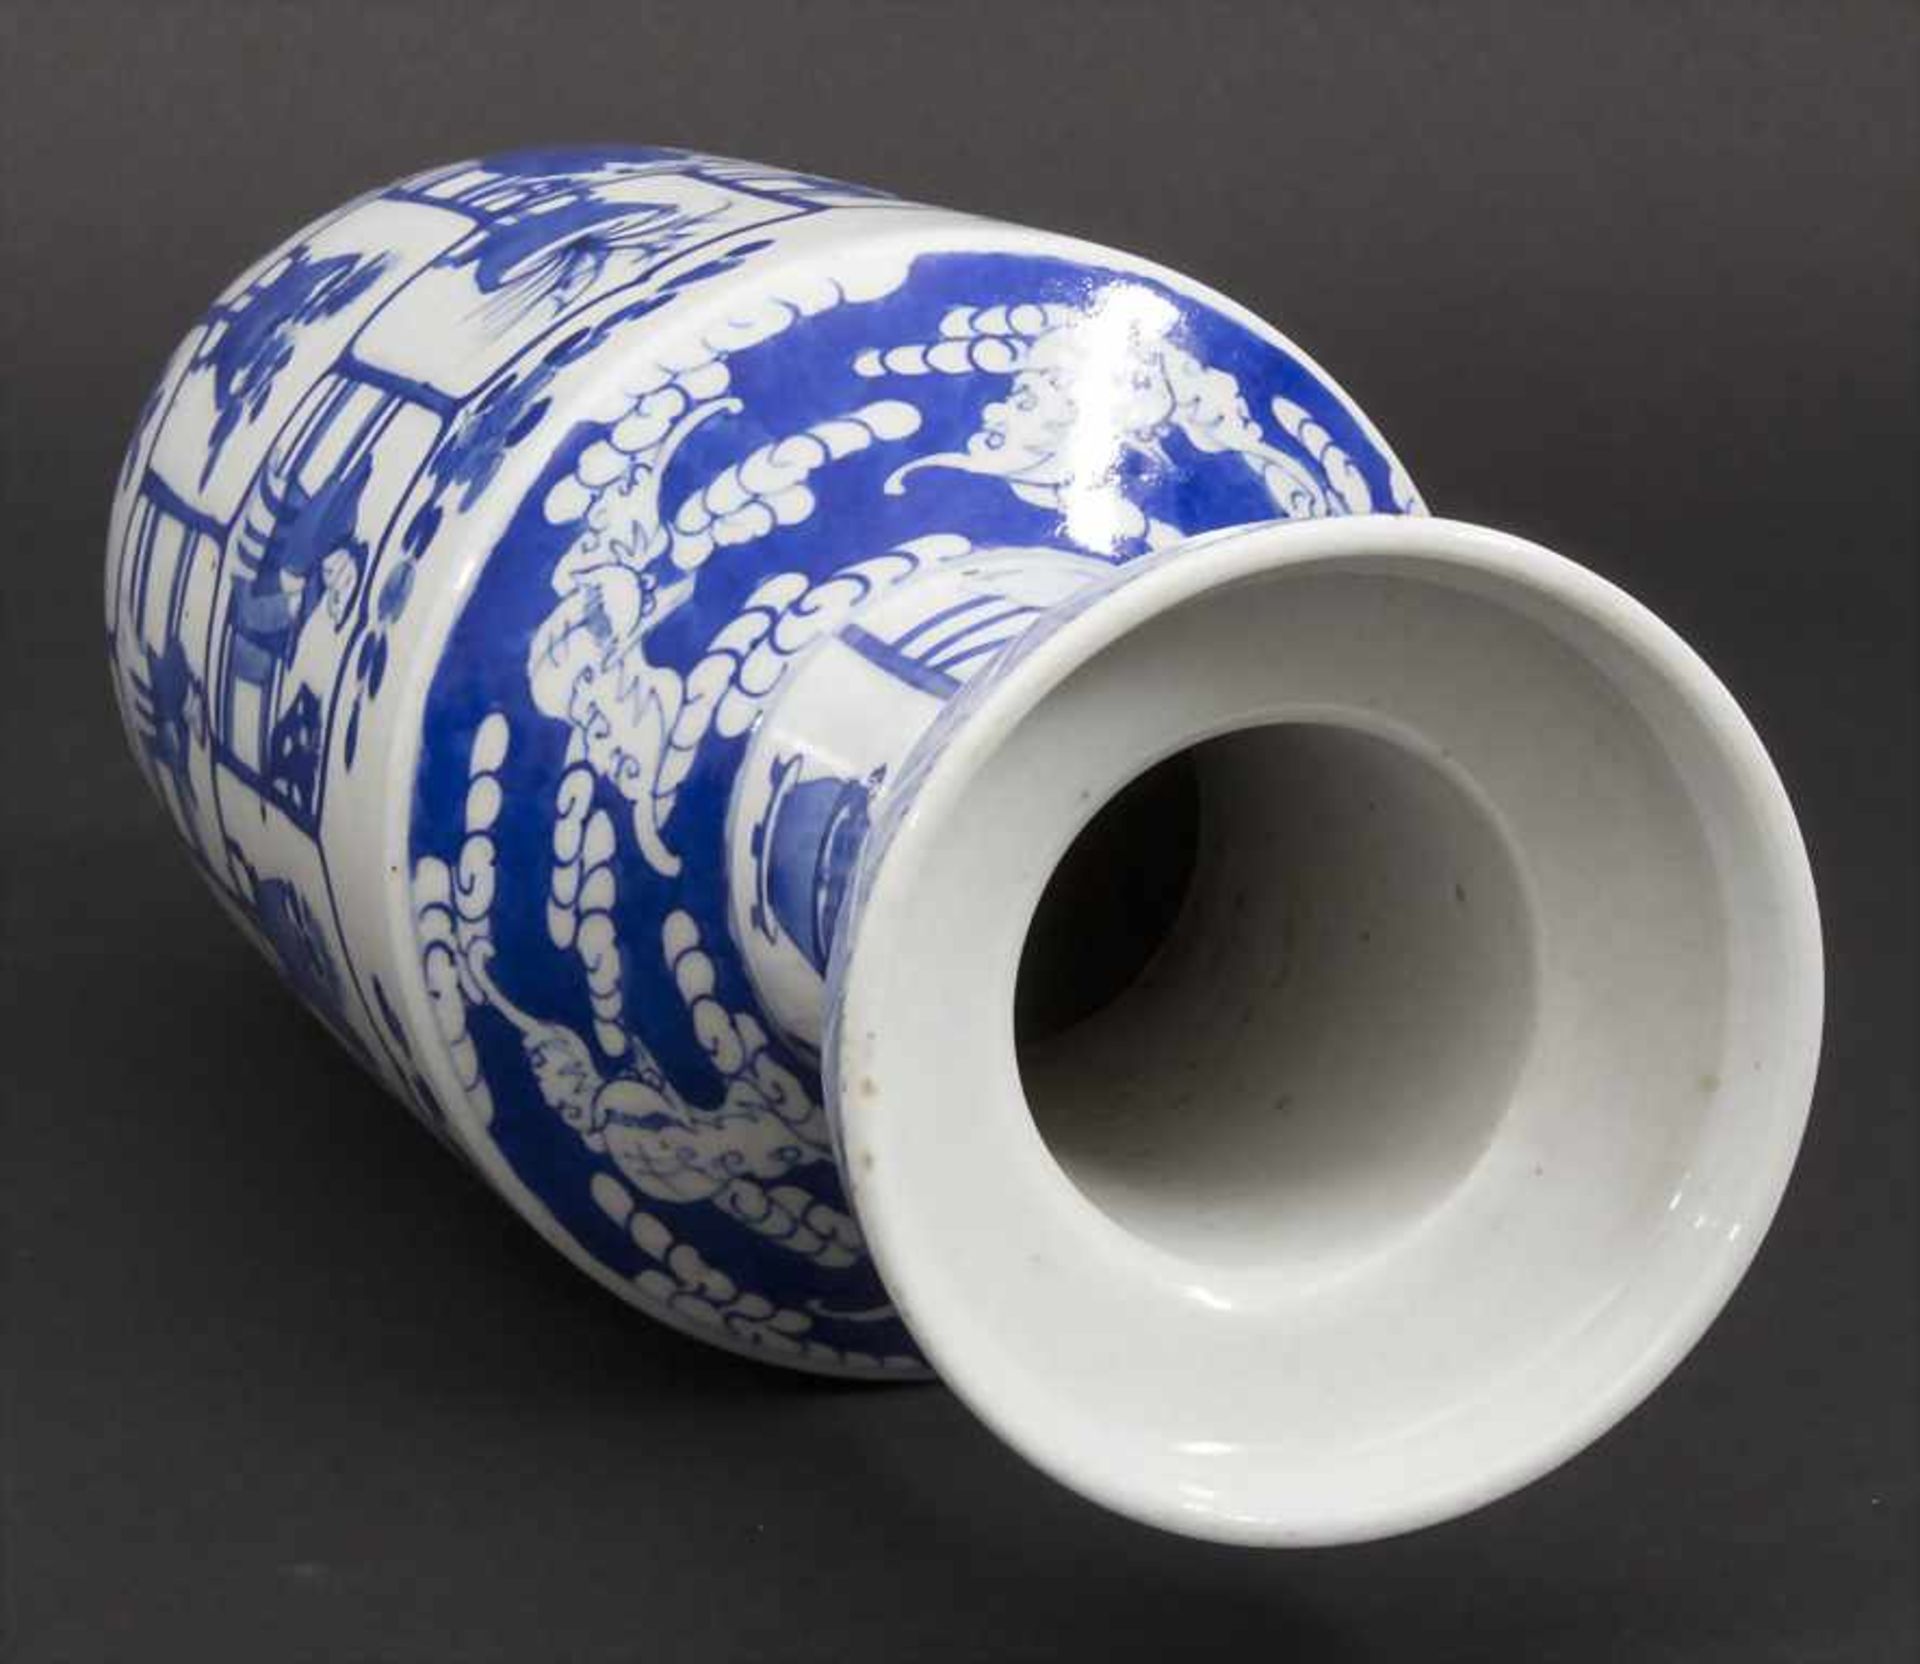 Ziervase / A decorative vase, China, Qing-Dynastie (1644-1911), wohl Kangxi-Periode (1662-1722) - Image 3 of 5